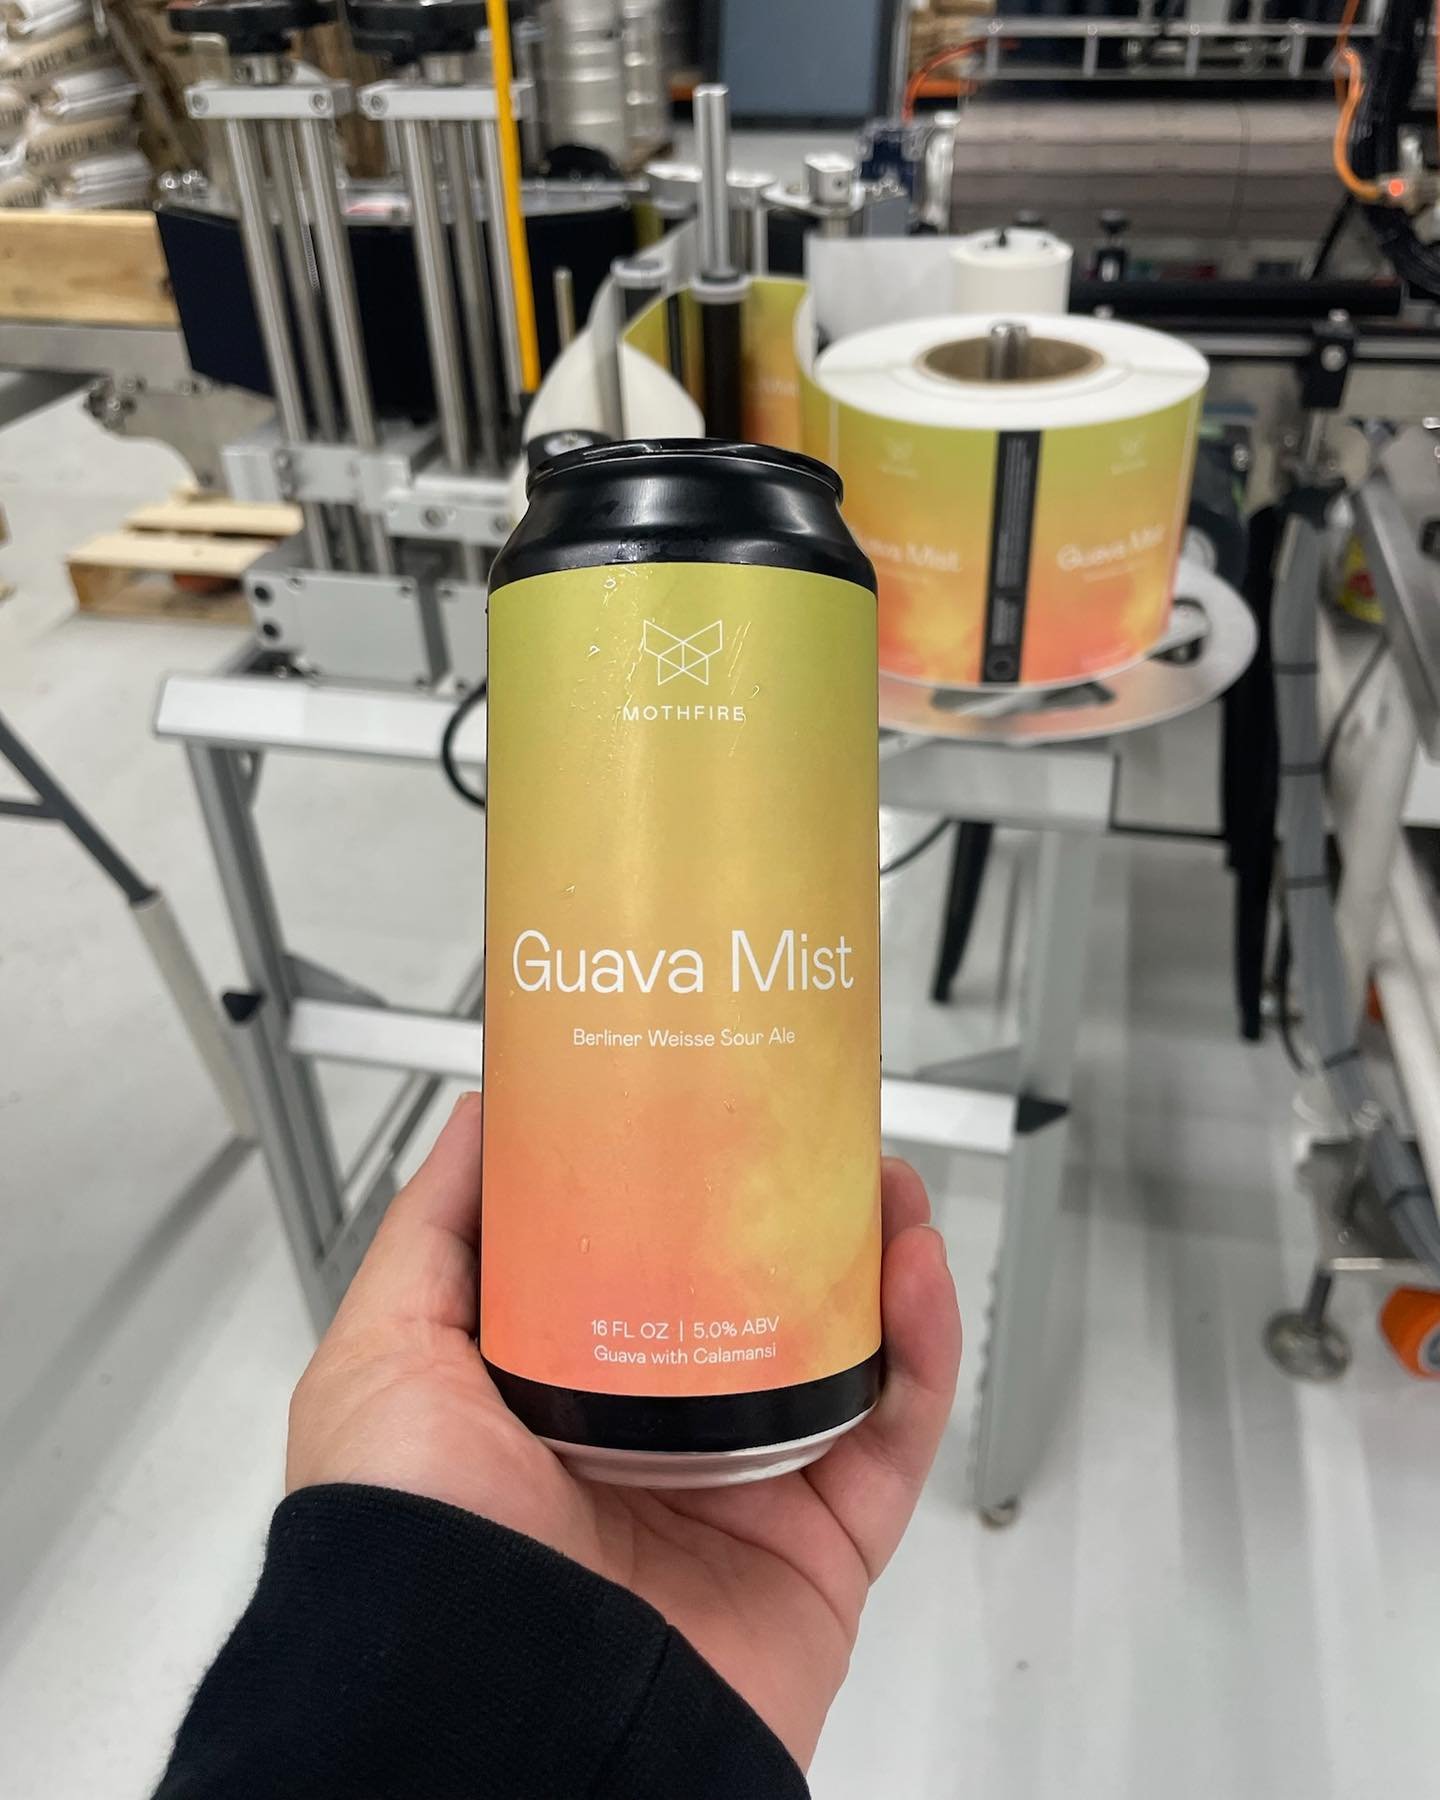 Welcome back GUAVA MIST! ☀️ 
Guava Mist is making its long over due return. Only brewed 2x before and at the old space. This batch is blended with Calamansi, a fruit native to the Philippines. It&rsquo;s sweet + sour, smells like a mandarin orange wi